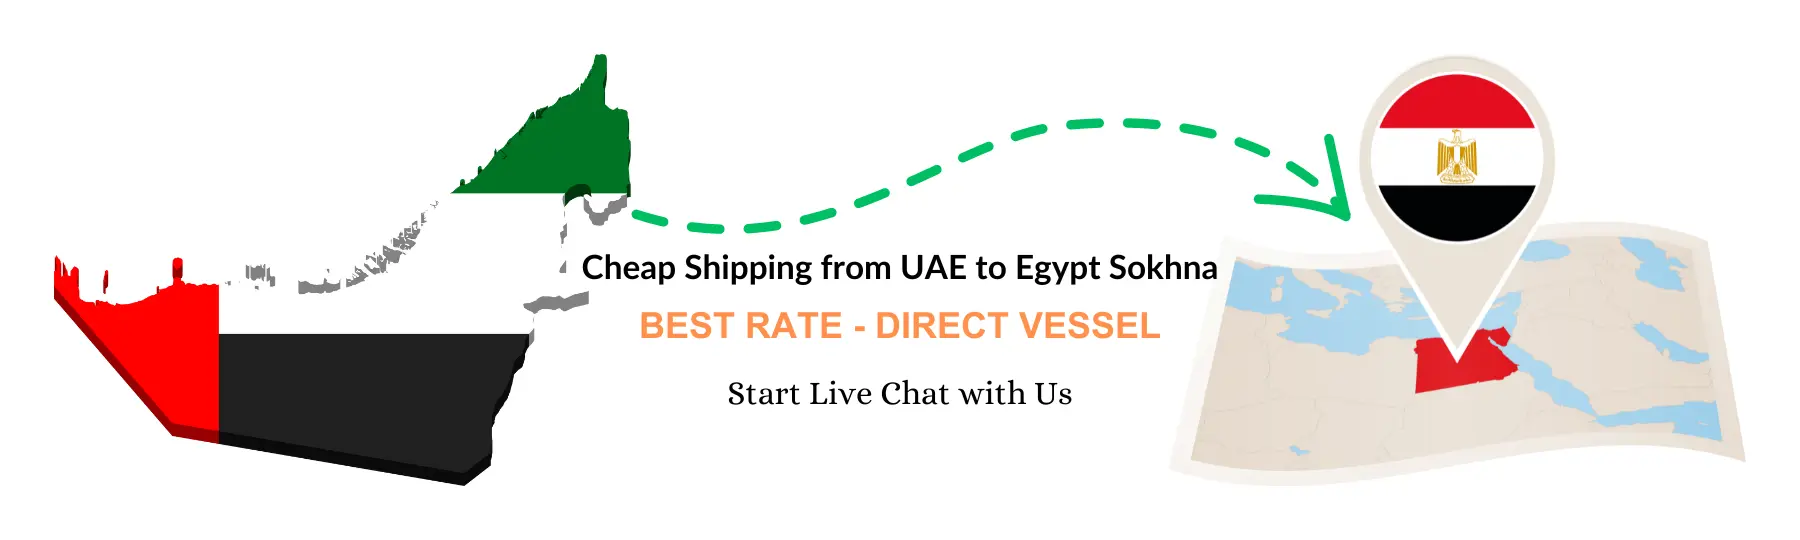 Direct Vessel -Cheap Shipping from UAE to Egypt Sokhna